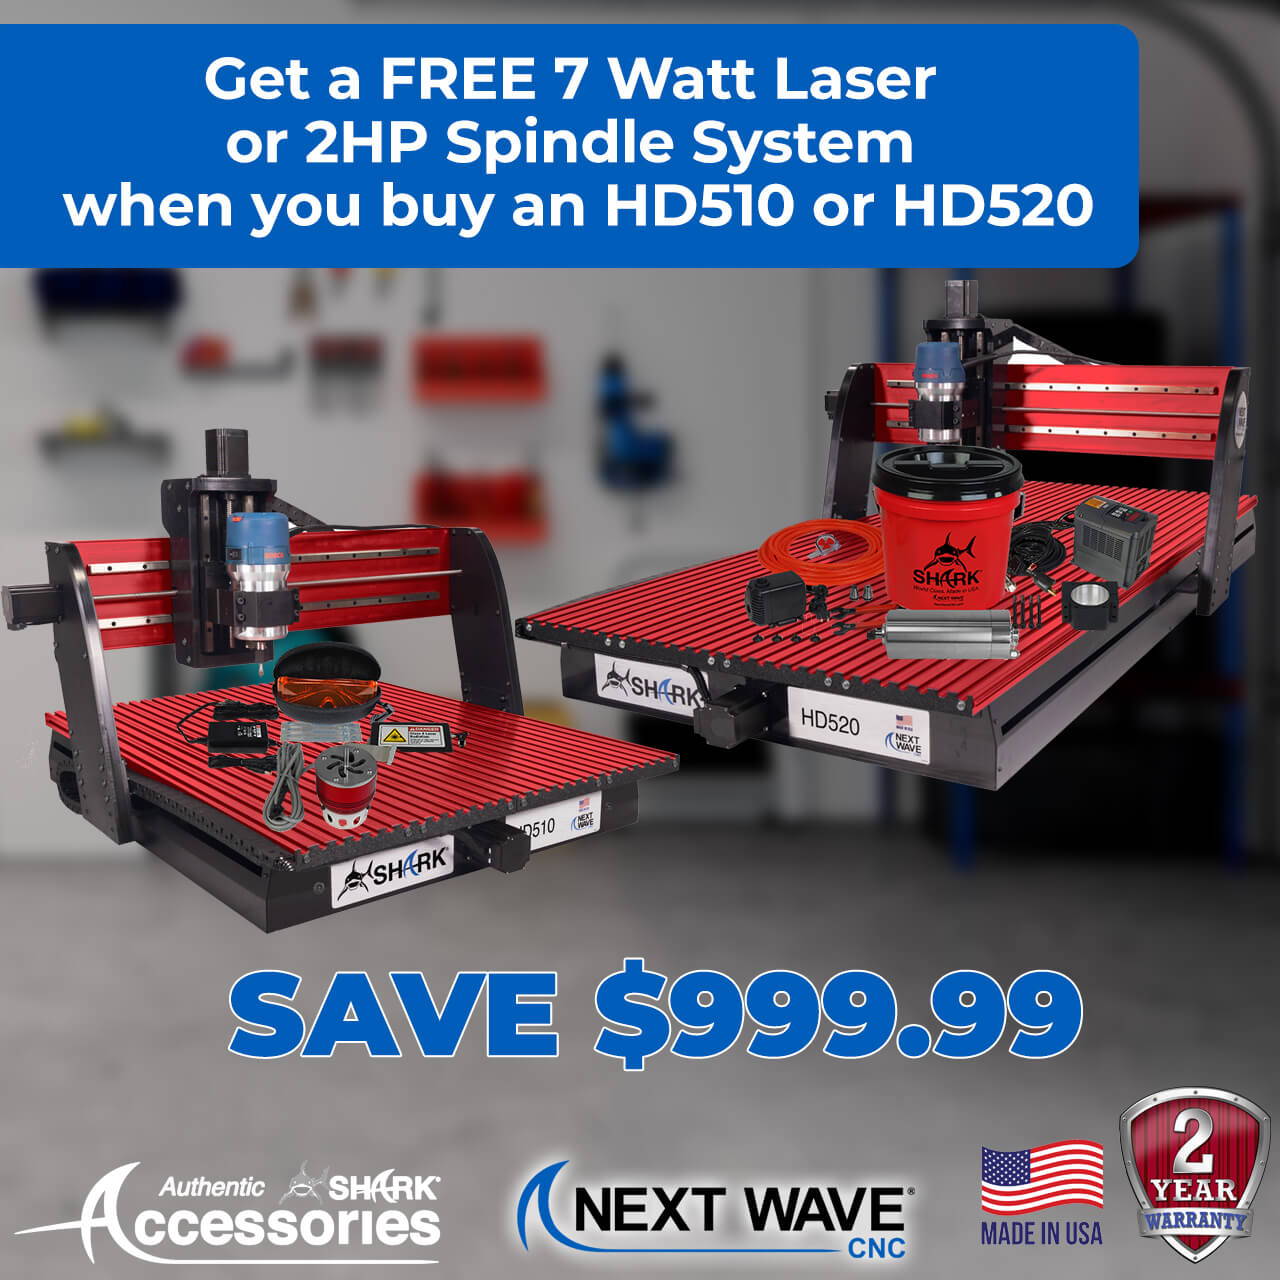 Get a FREE 7 Watt Laser or 2HP Spindle System when you buy an HD510 or HD520